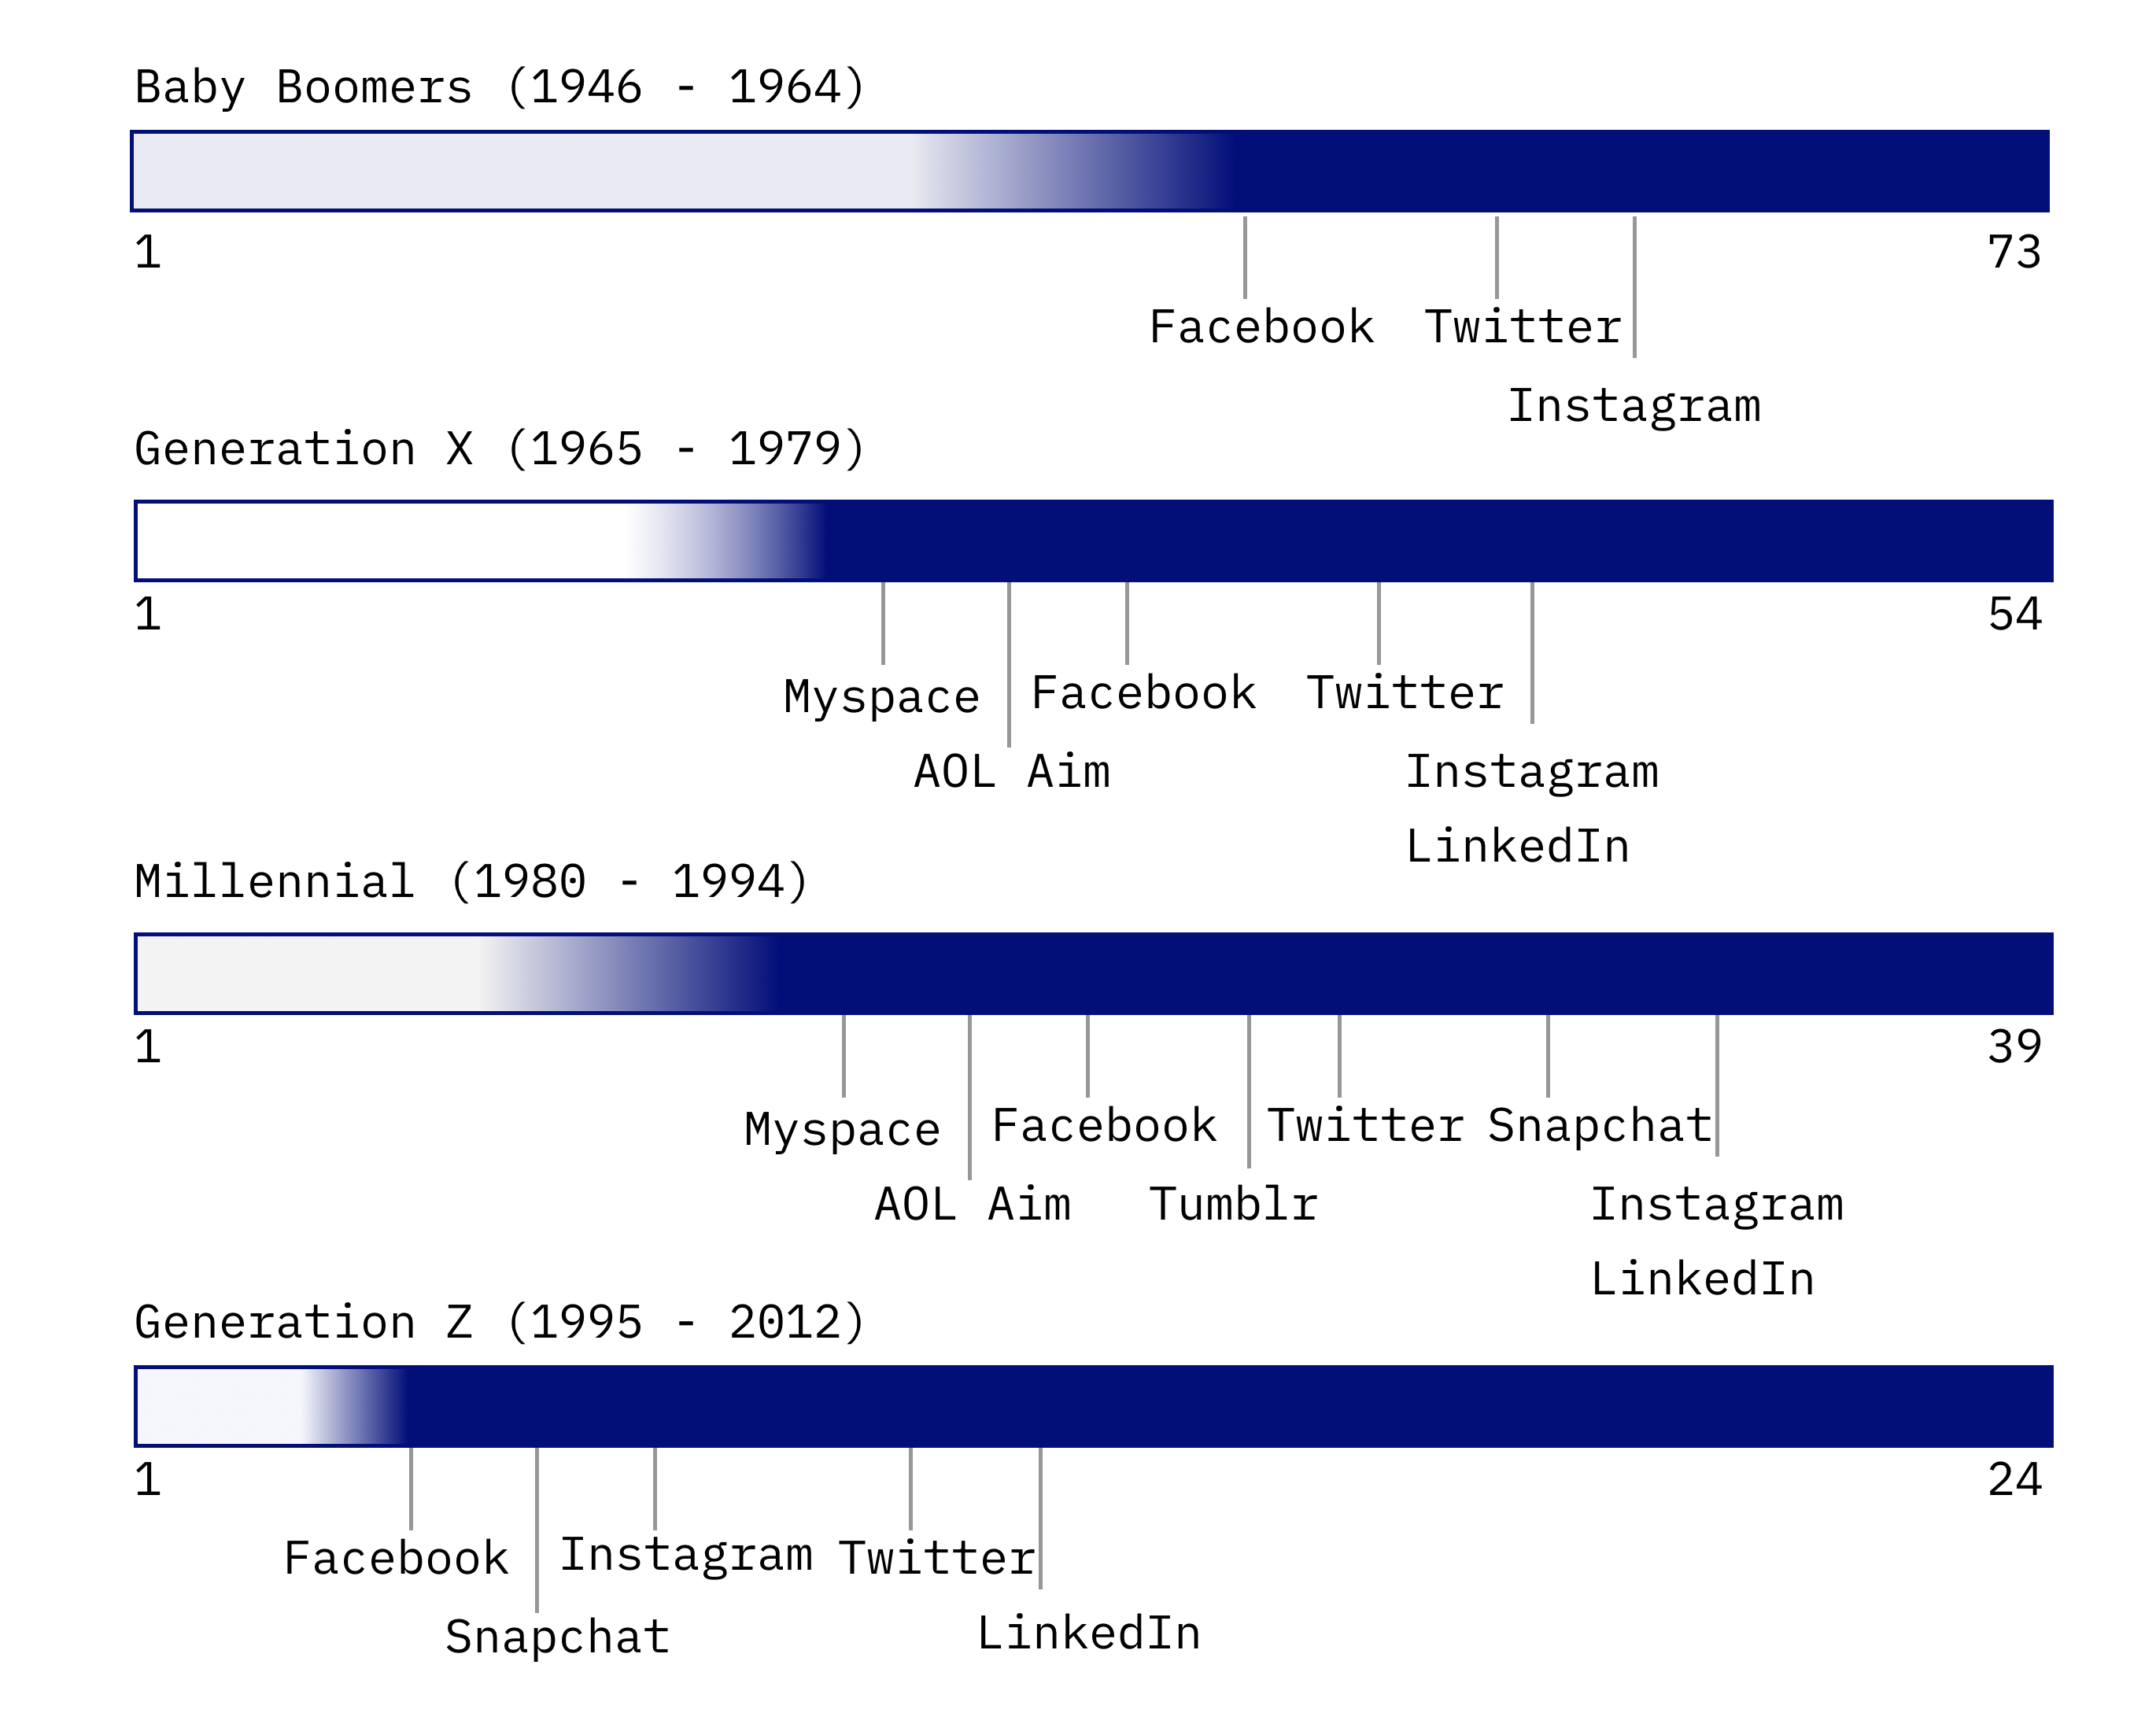 Timeline diagram of social network adoption by generation.